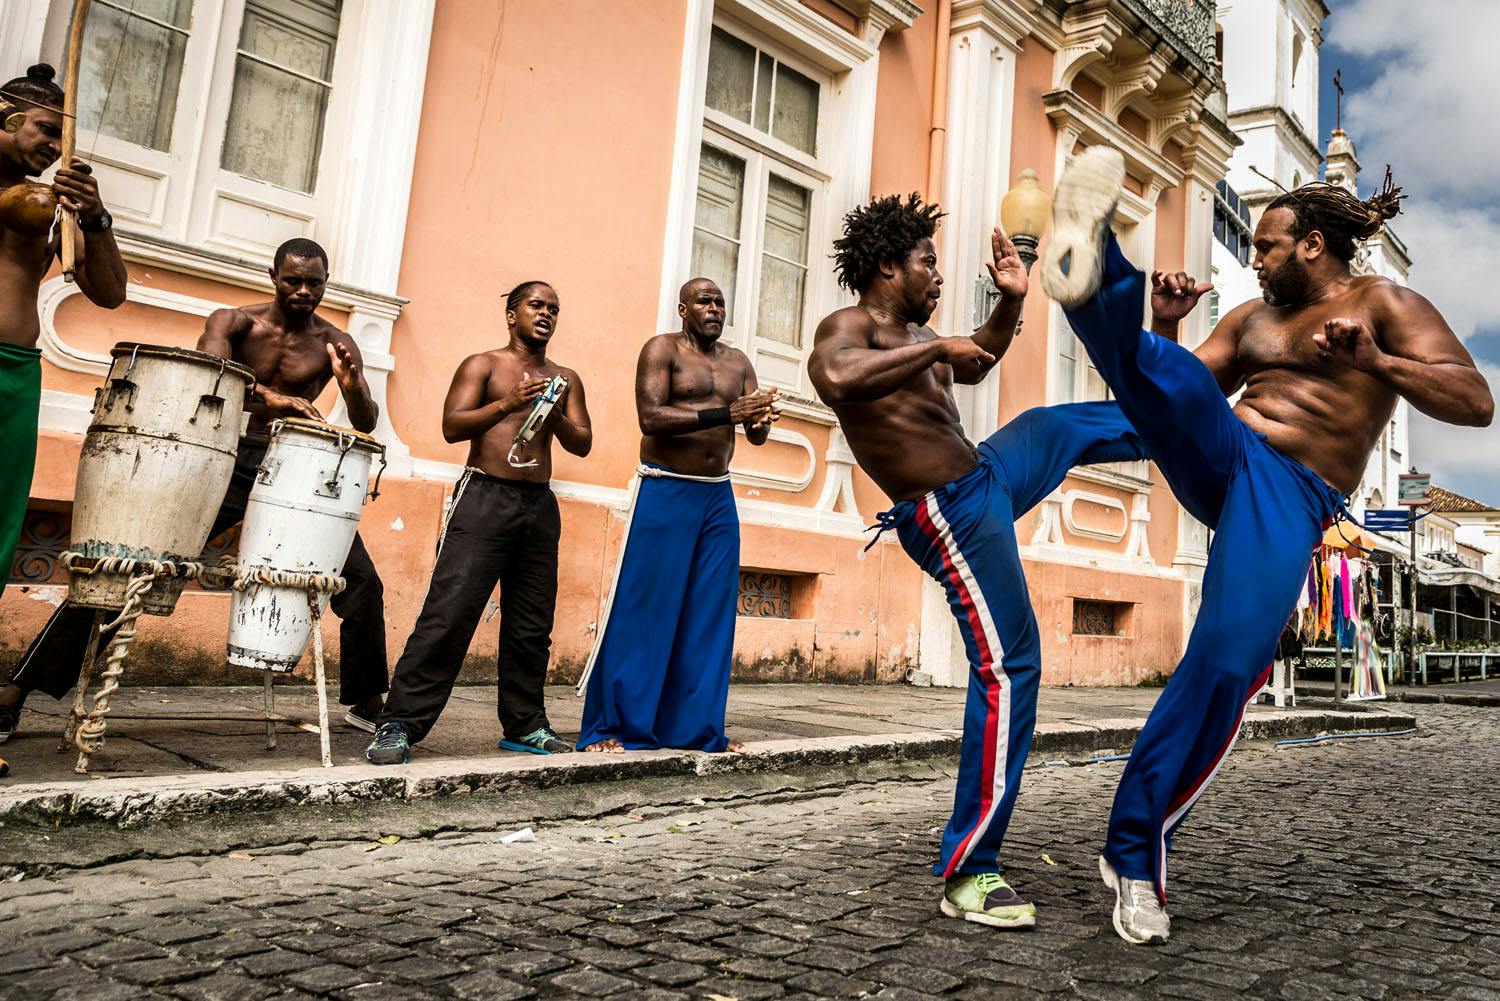 capoeira - a traditional sport in brazil